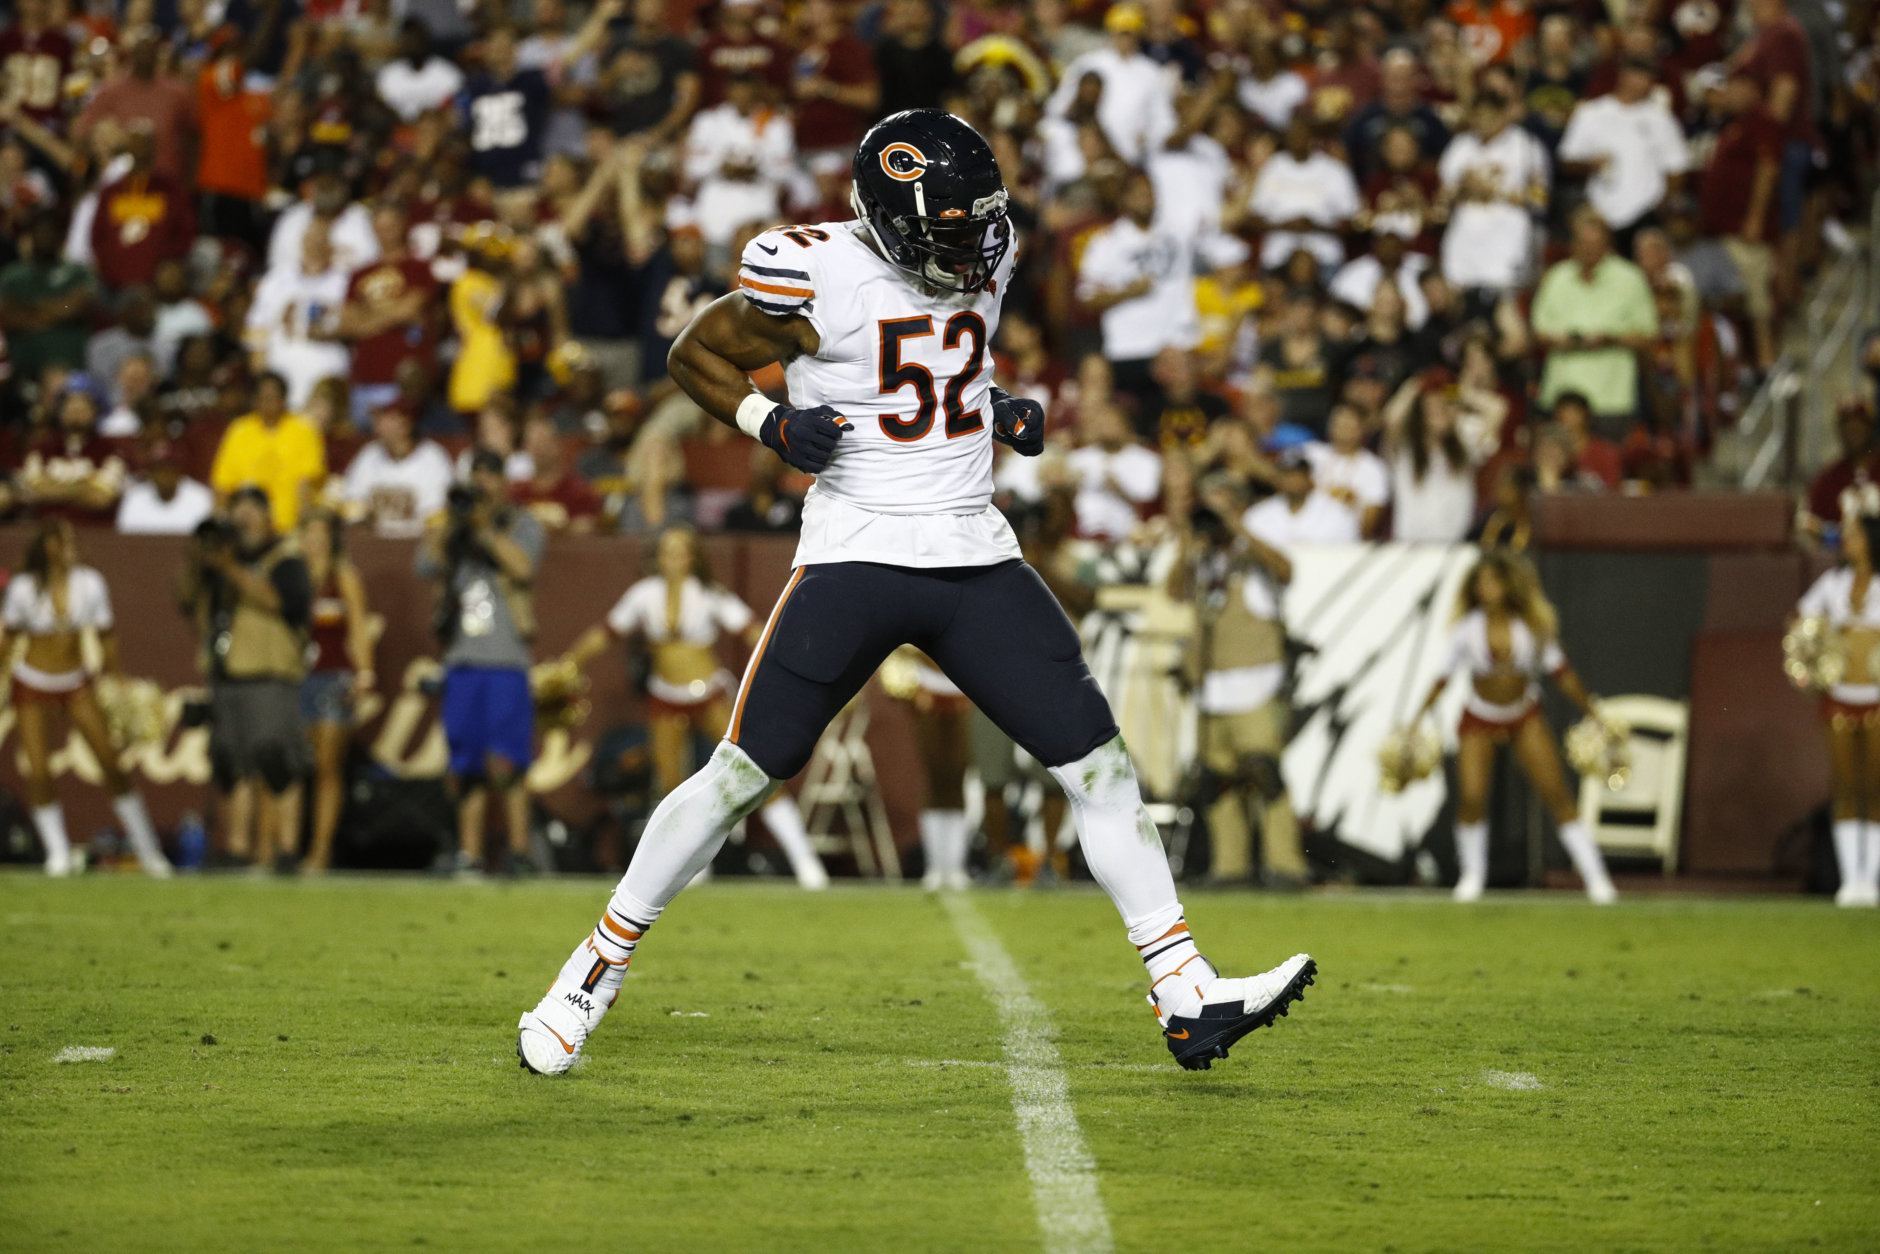 Chicago Bears outside linebacker Khalil Mack (52) celebrates his hit to cause a fumble during the first half of an NFL football game against the Washington Redskins, Monday, Sept. 23, 2019, in Landover, Md. (AP Photo/Patrick Semansky)